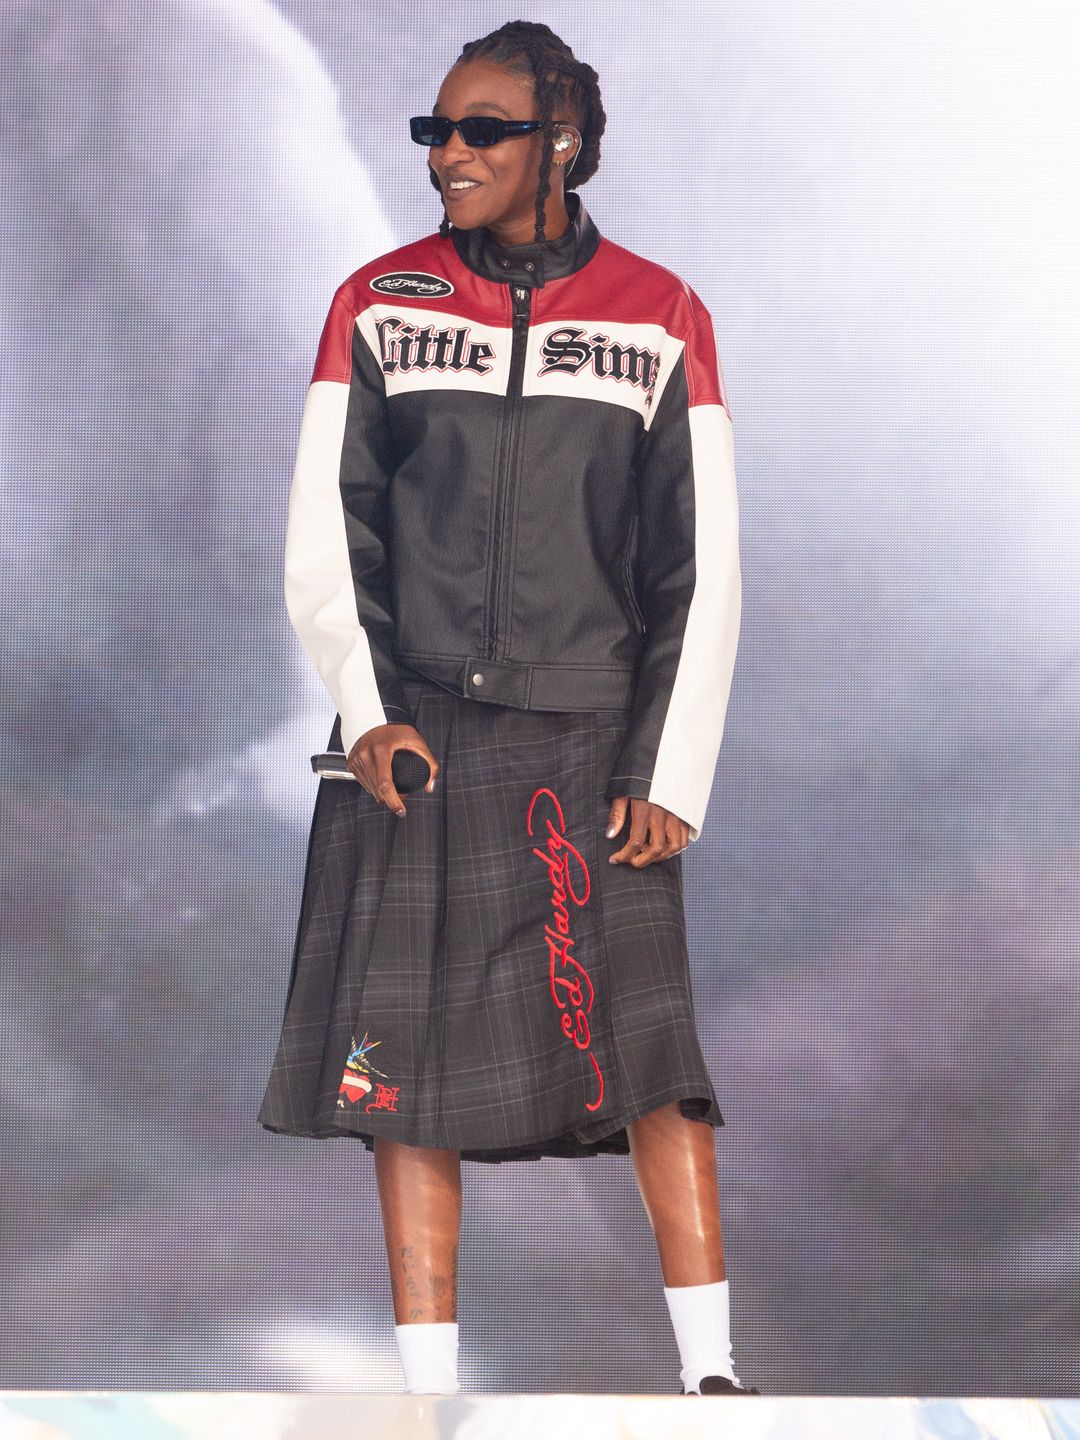 Little Simz performed in a customised motorbike jacket and an Ed Hardy skirt